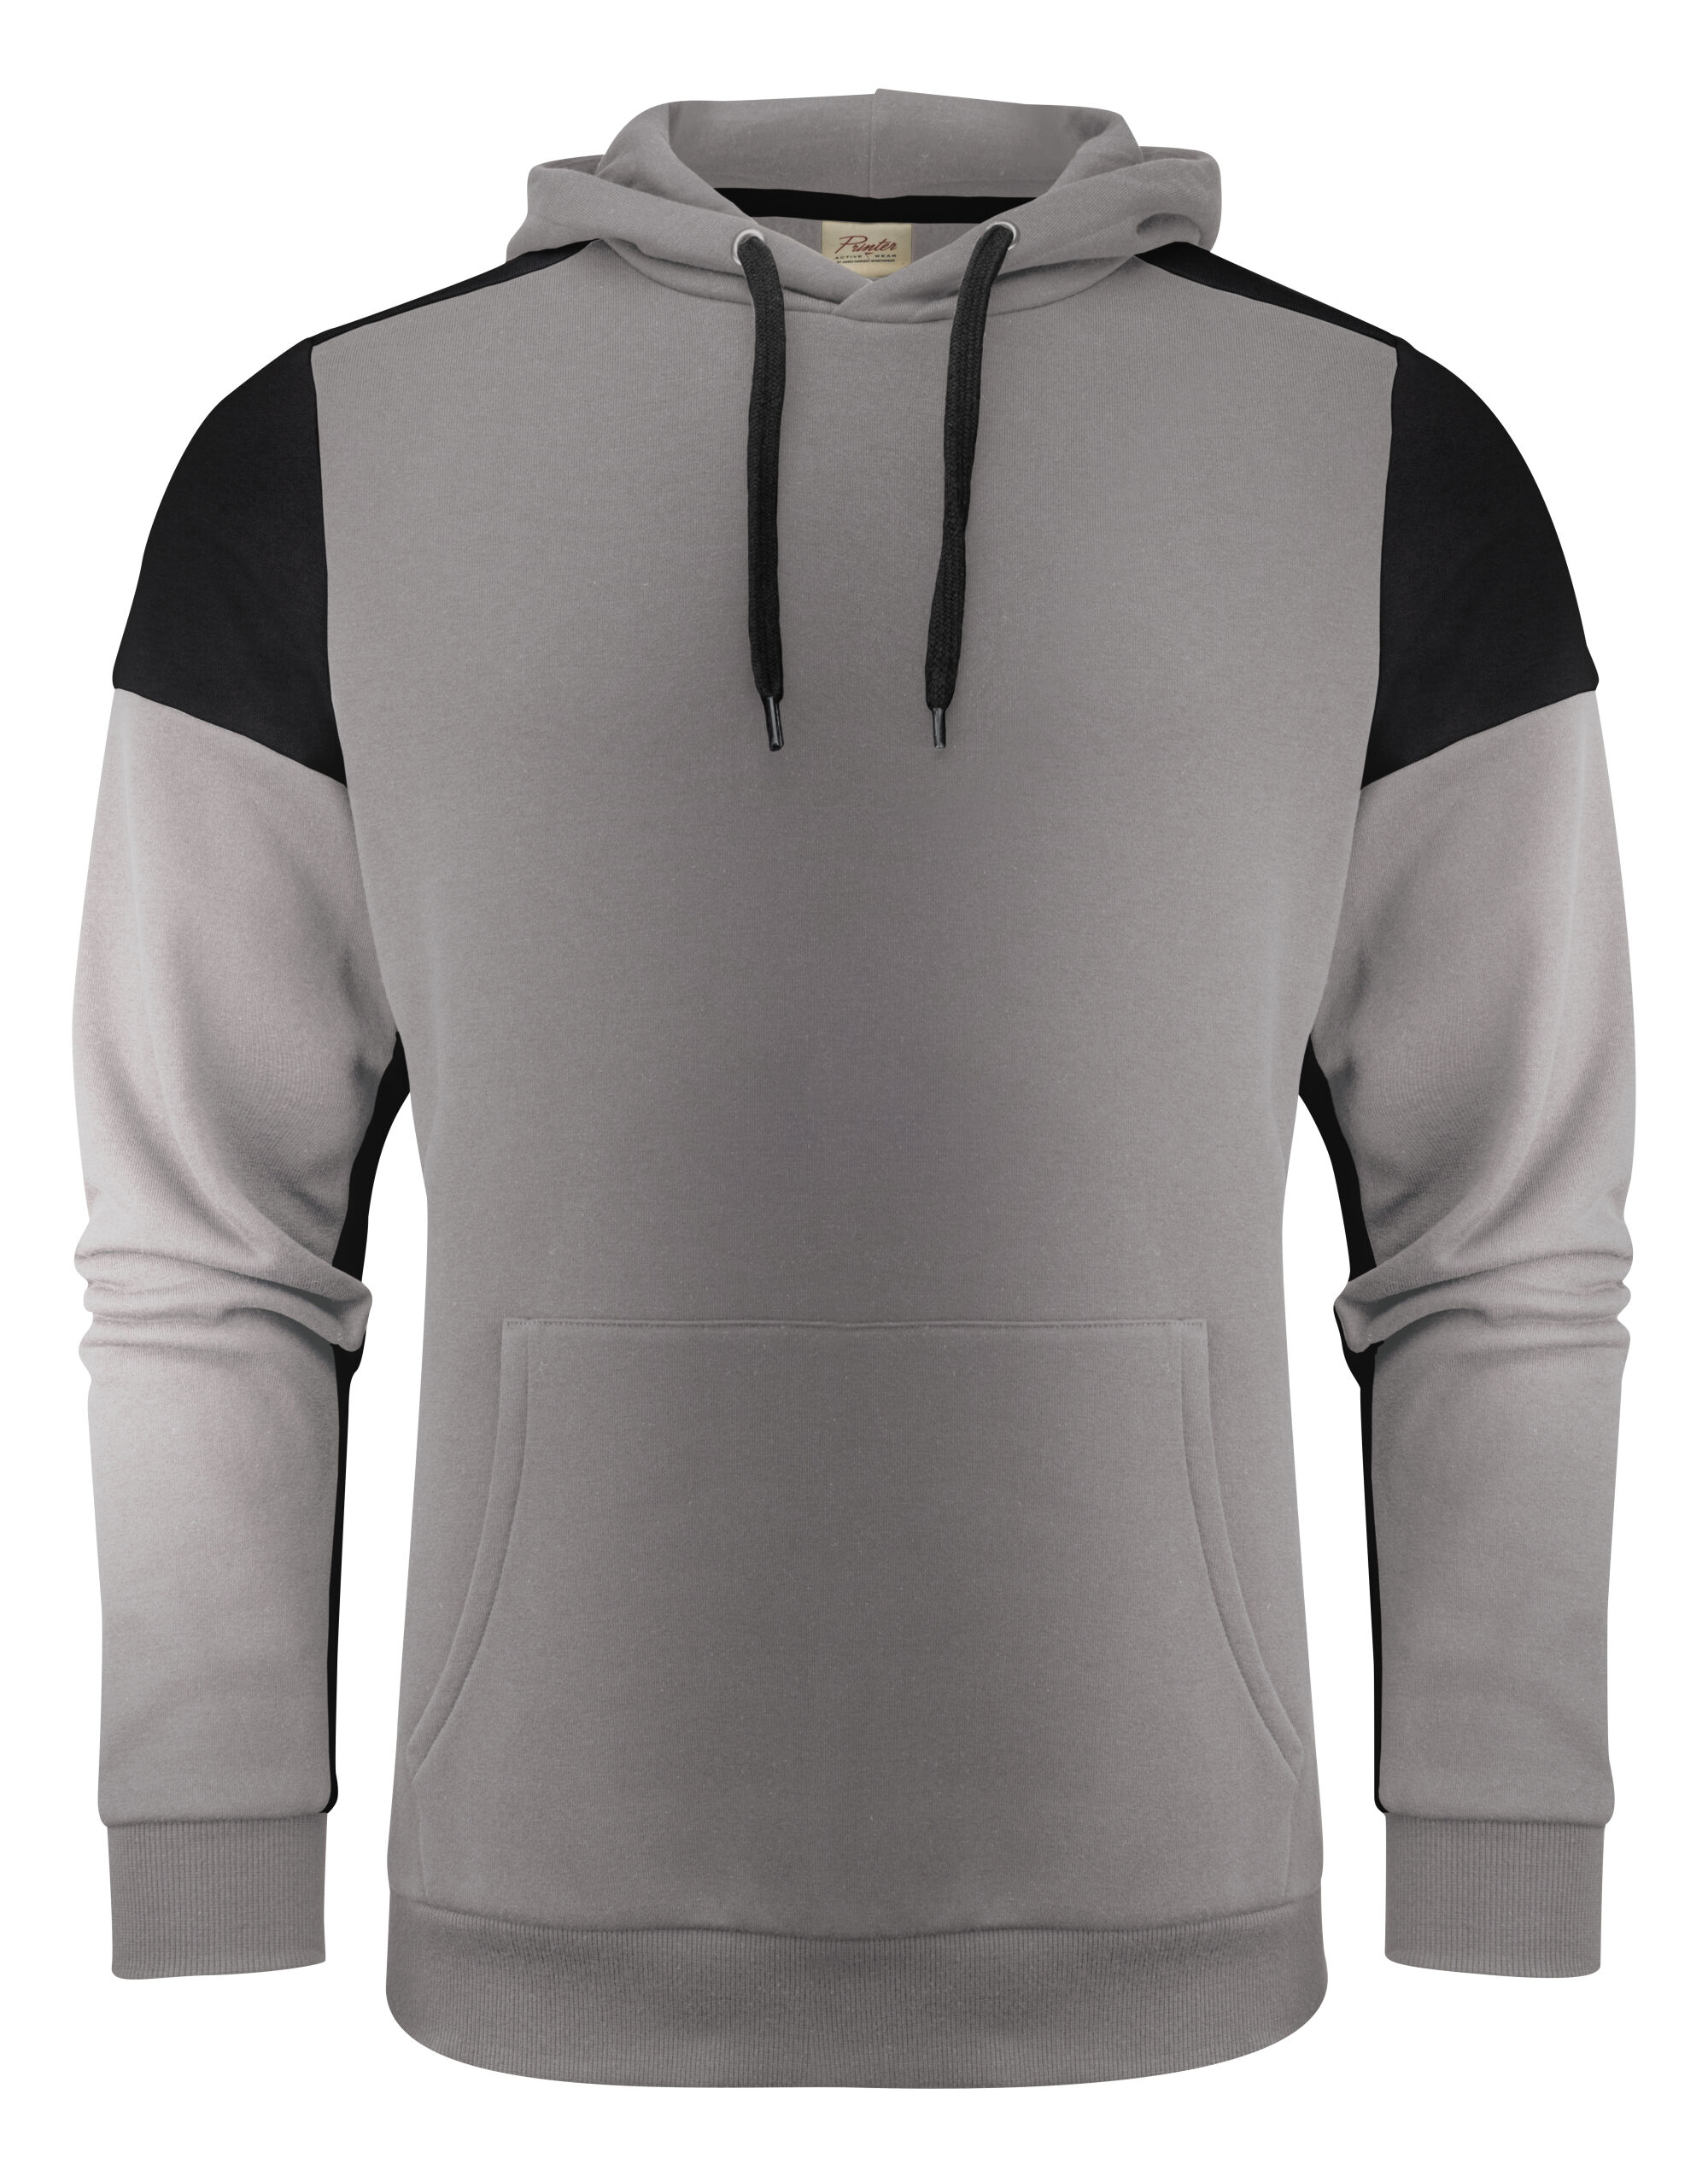 Prime Hoody_Anthracite_Black_Front_pp2262070_166177